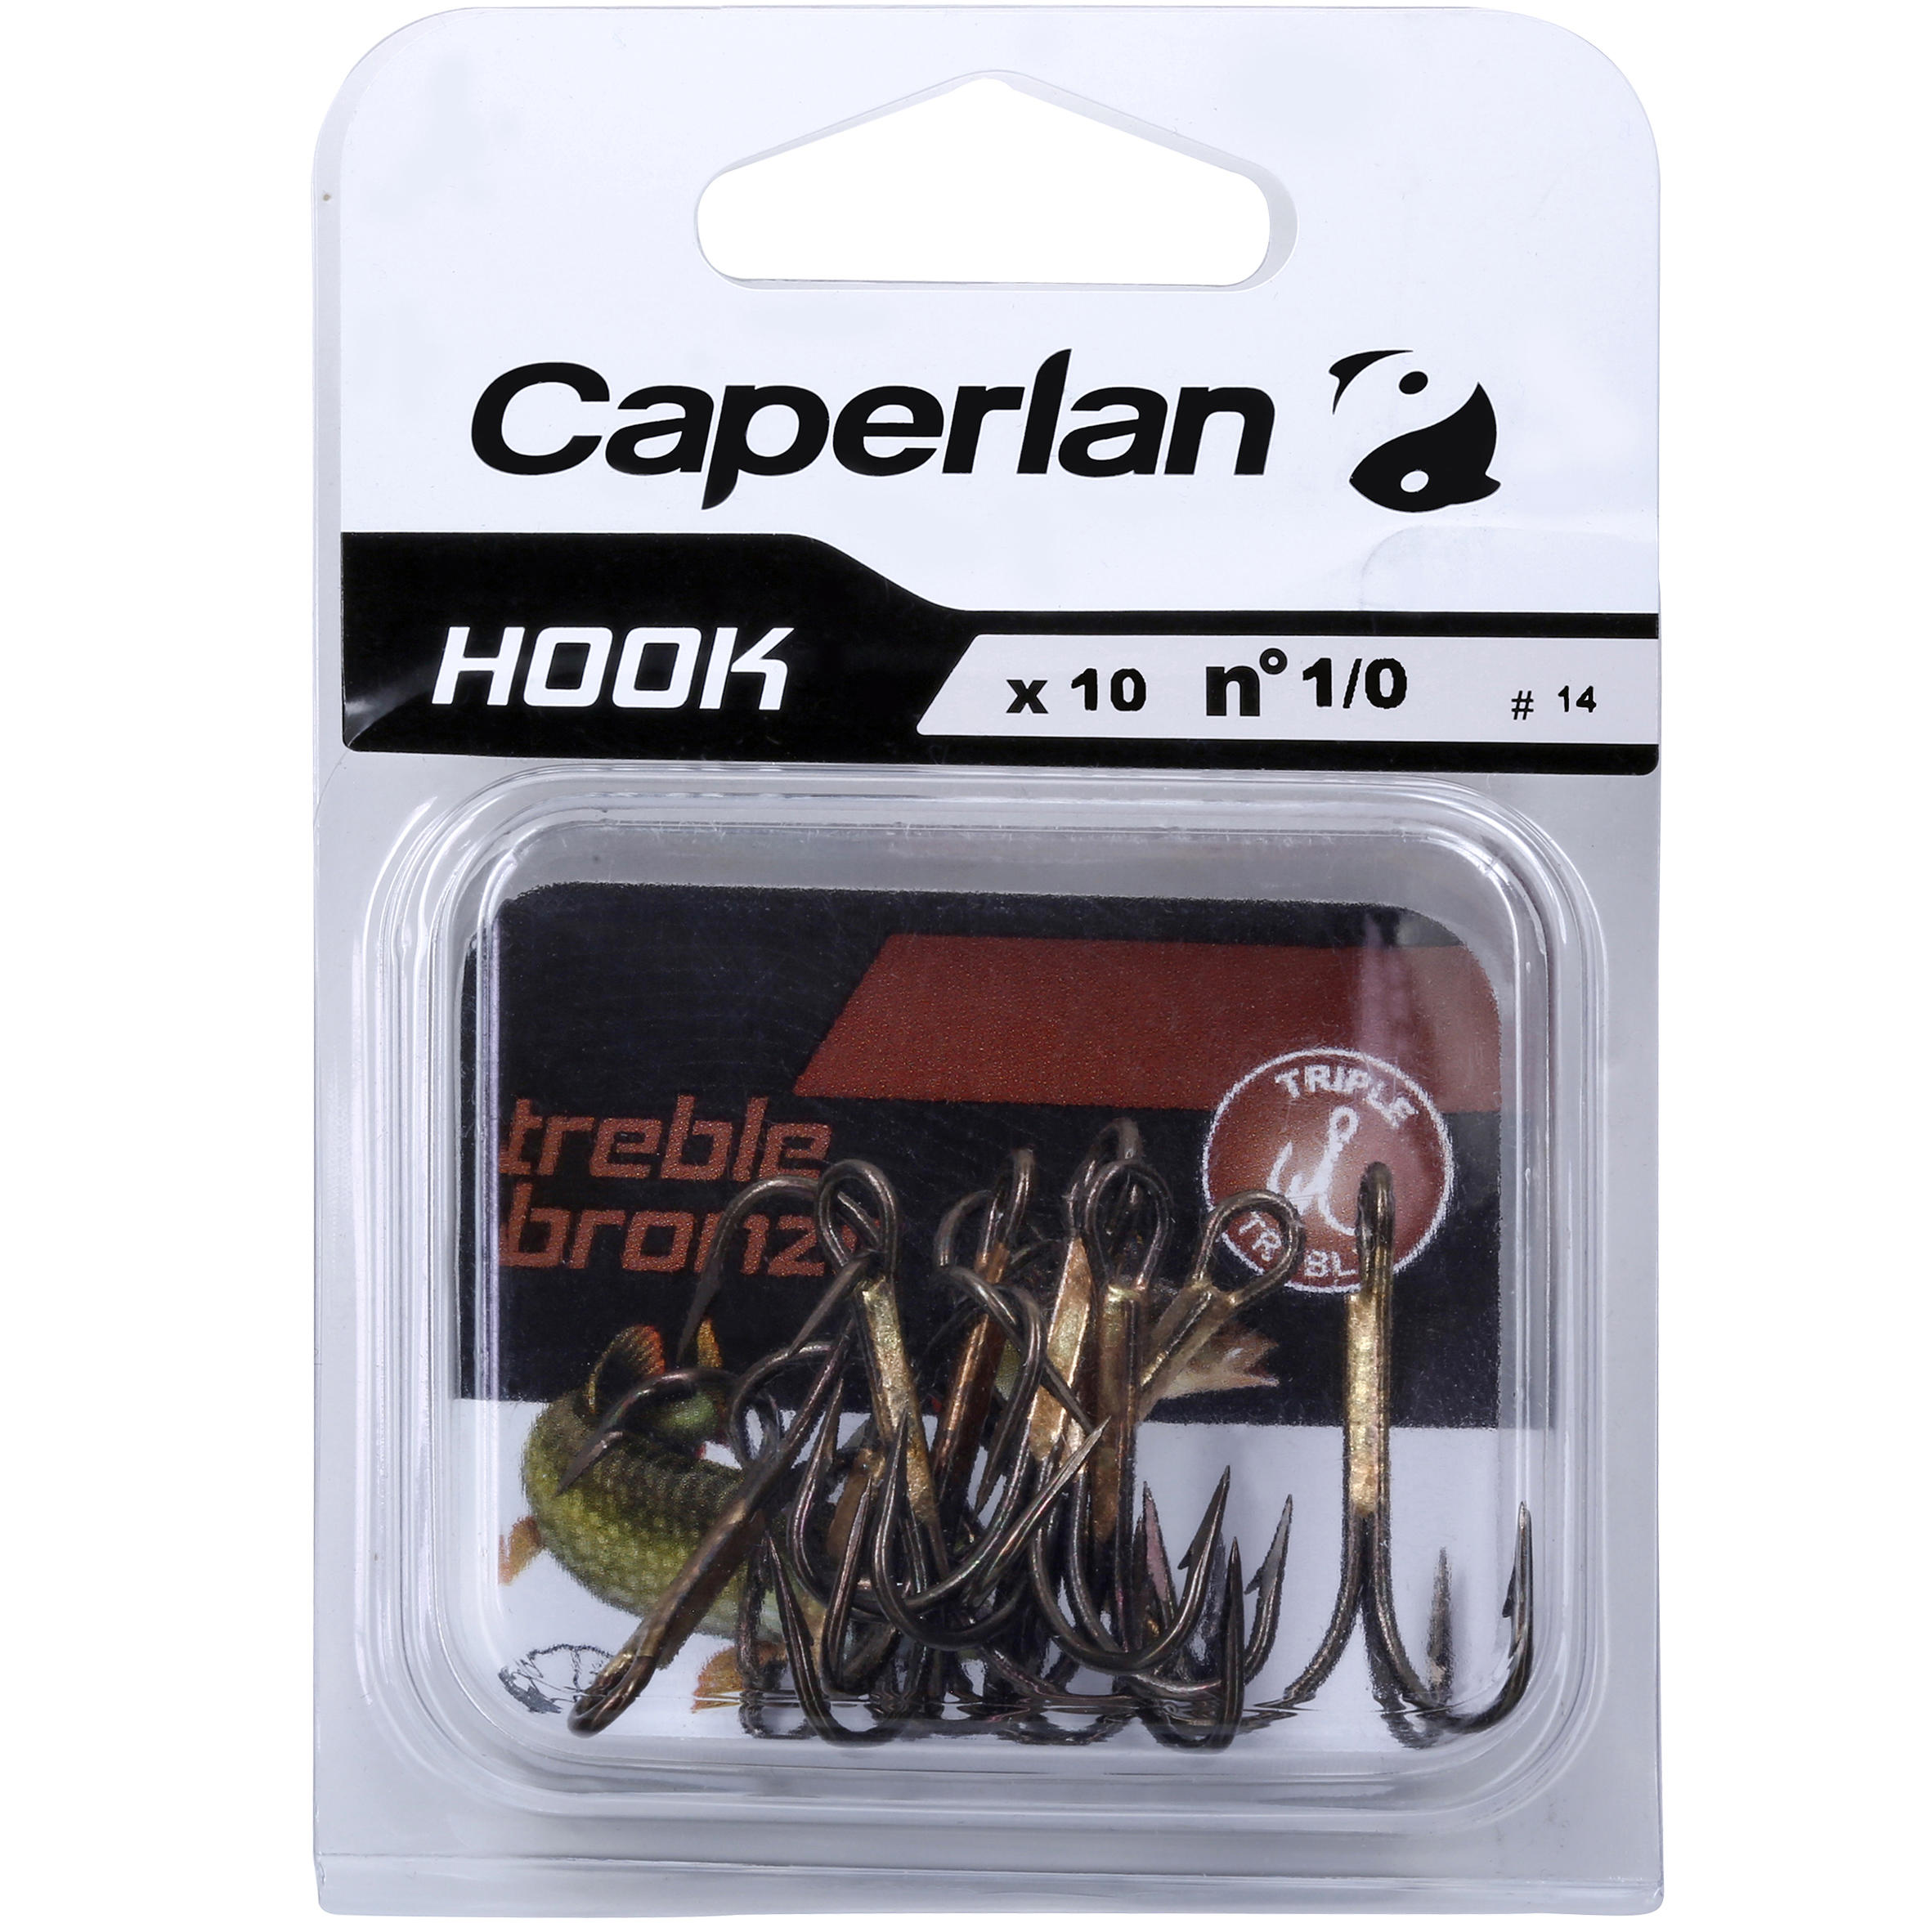  Catchmore Snelled Hooks - Size 4 - Gold Hook - 6 Per Pkg, 24  Packs=144 Hooks - #AB-4 : Sports & Outdoors